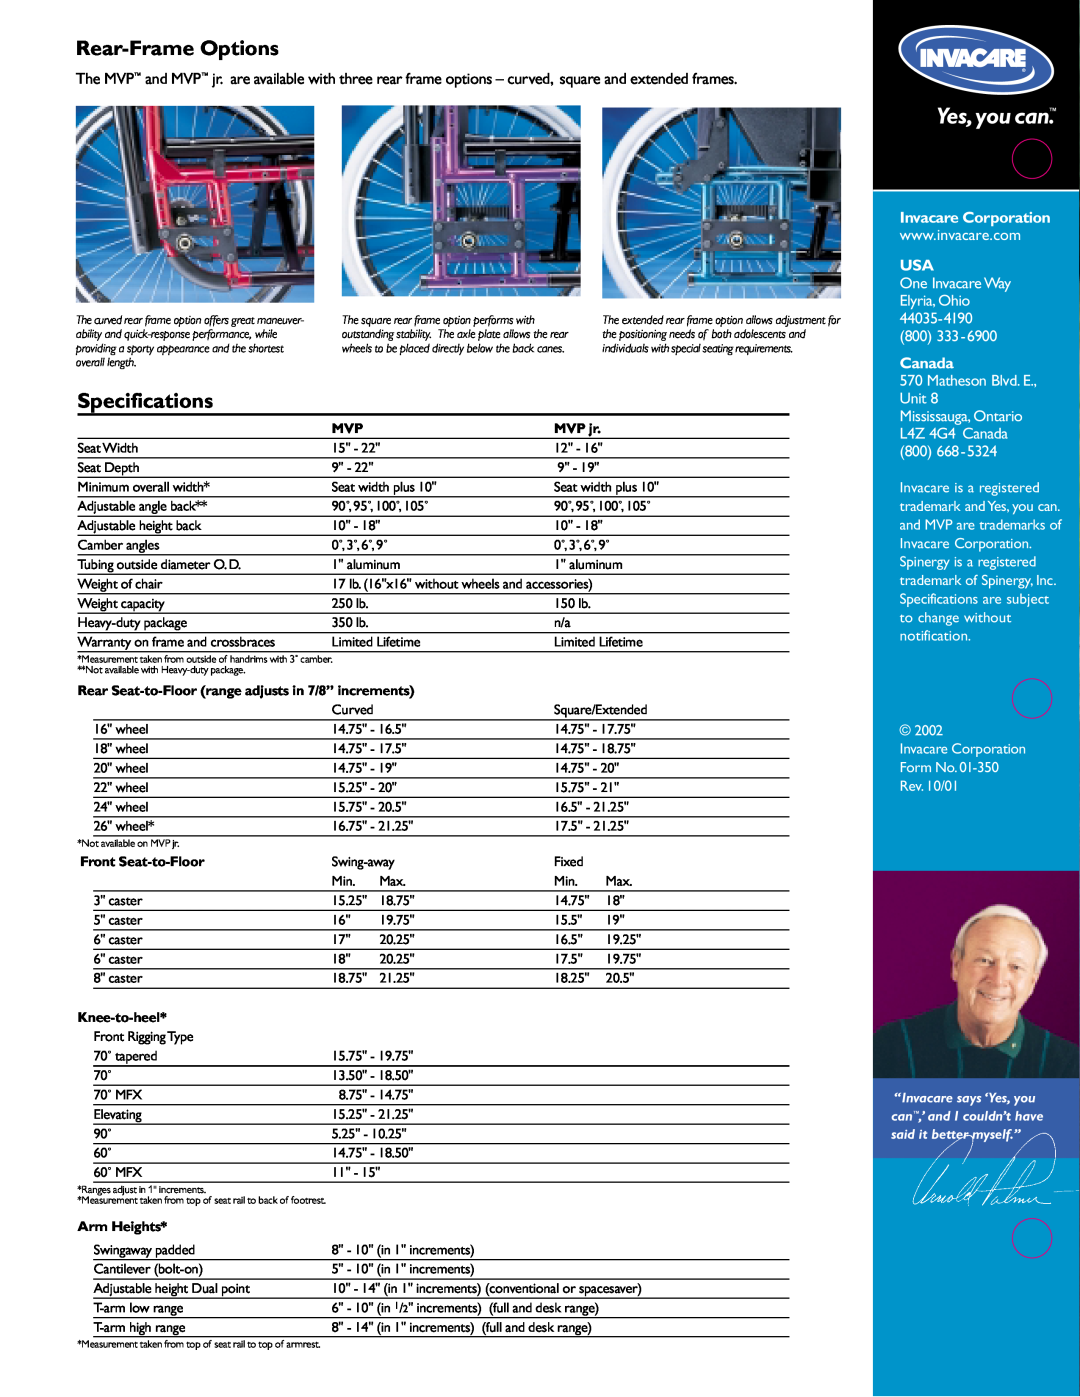 Invacare MVP Rear-Frame Options, Specifications, Invacare Corporation, One Invacare Way Elyria, Ohio 44035-4190 800, 2002 